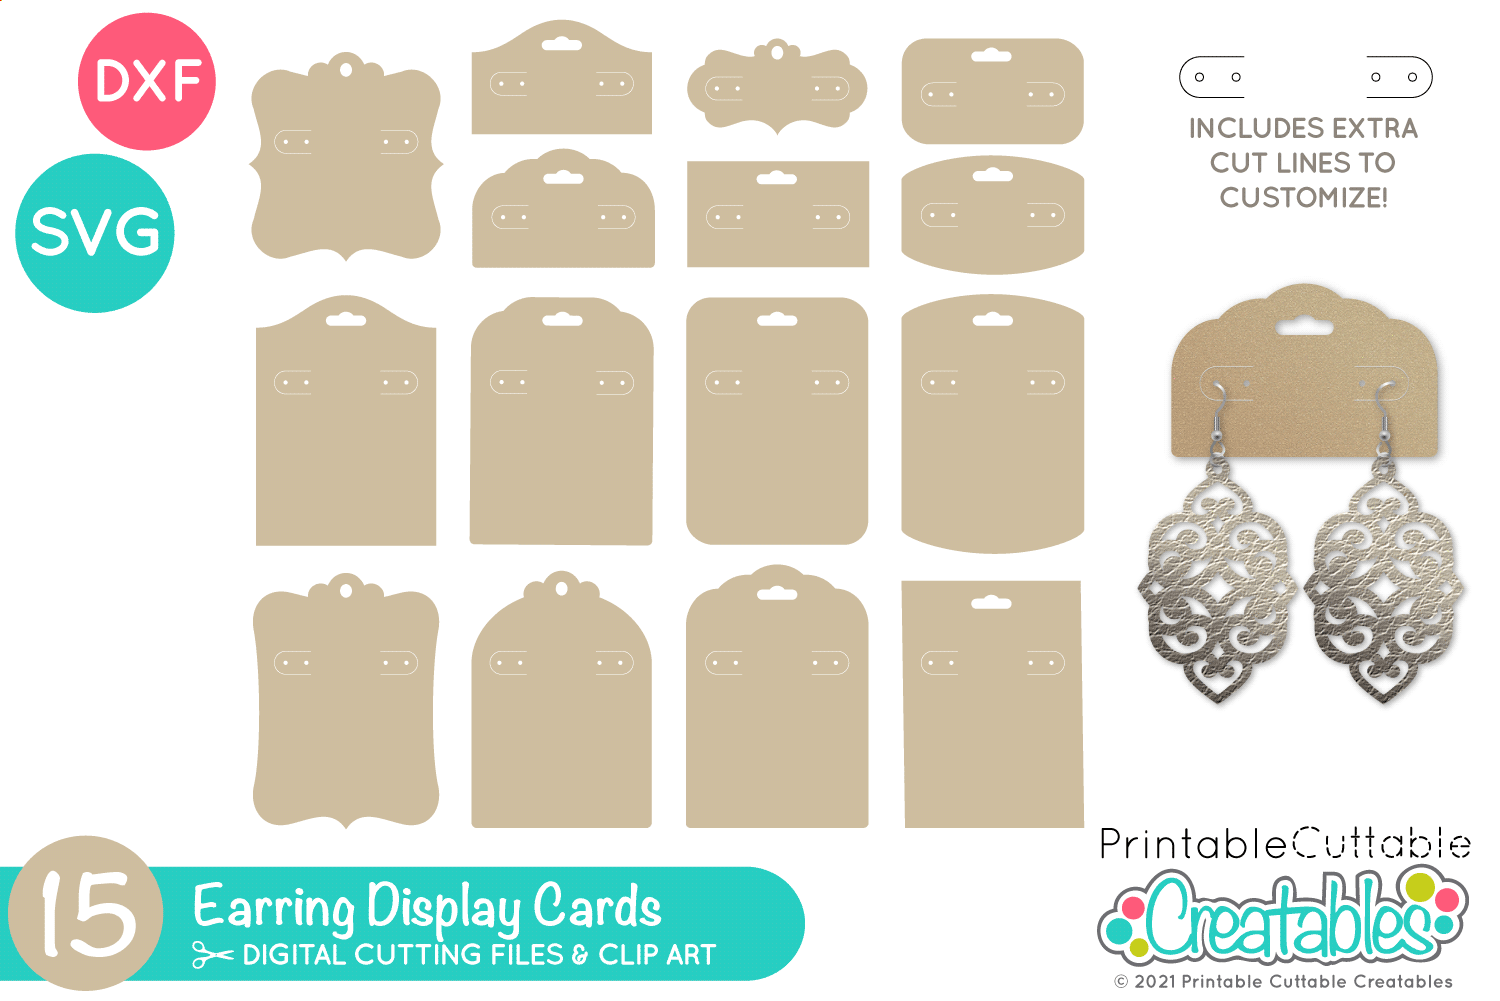 EARRING DISPLAY CARDS SVG BUNDLE Graphic by Hello Talii · Creative Fabrica